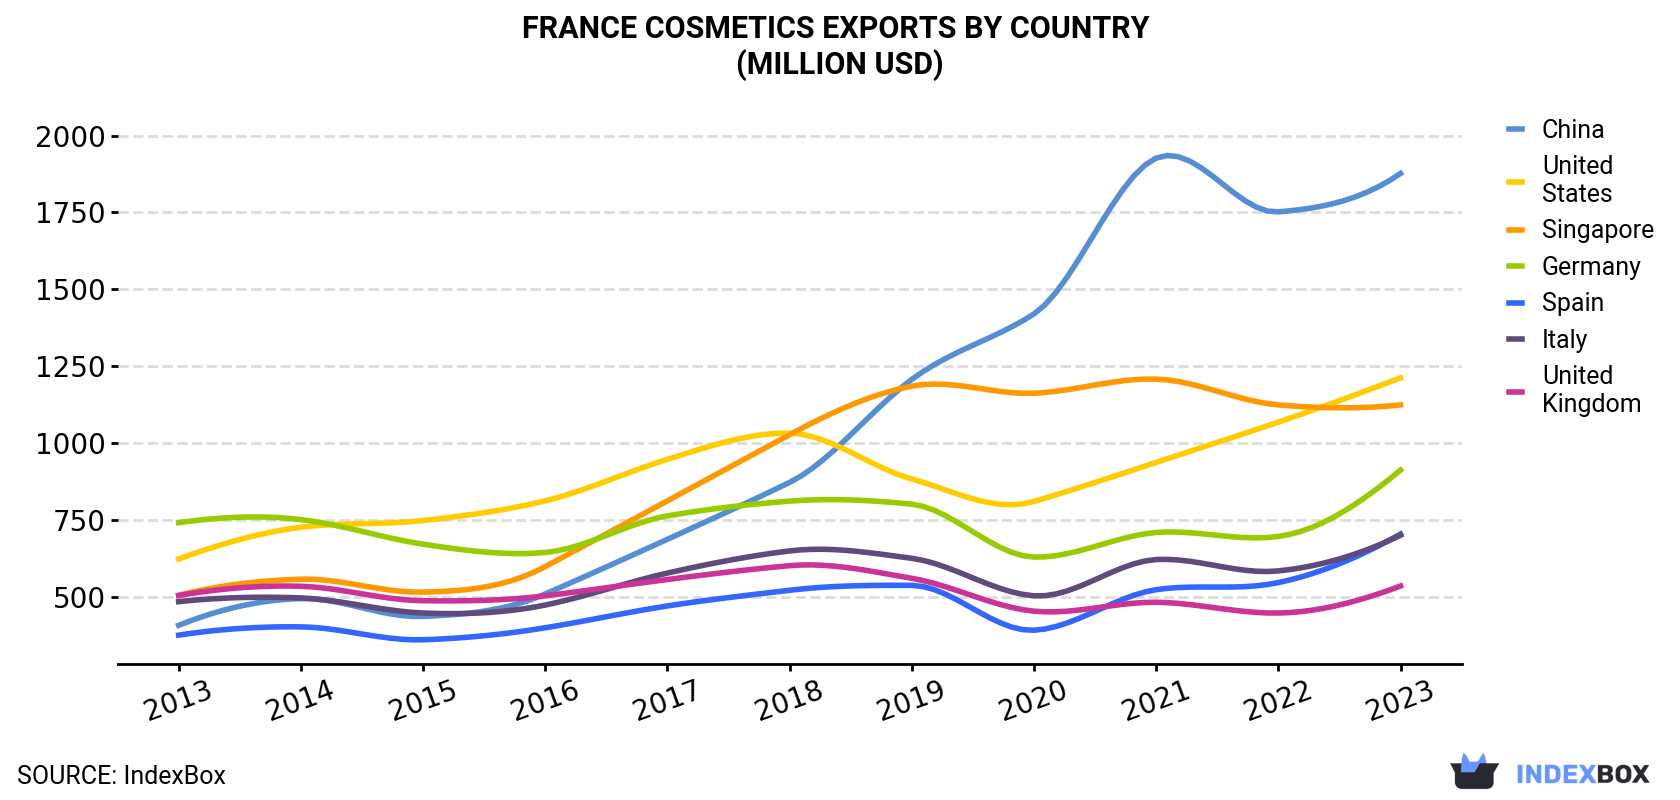 France Cosmetics Exports By Country (Million USD)